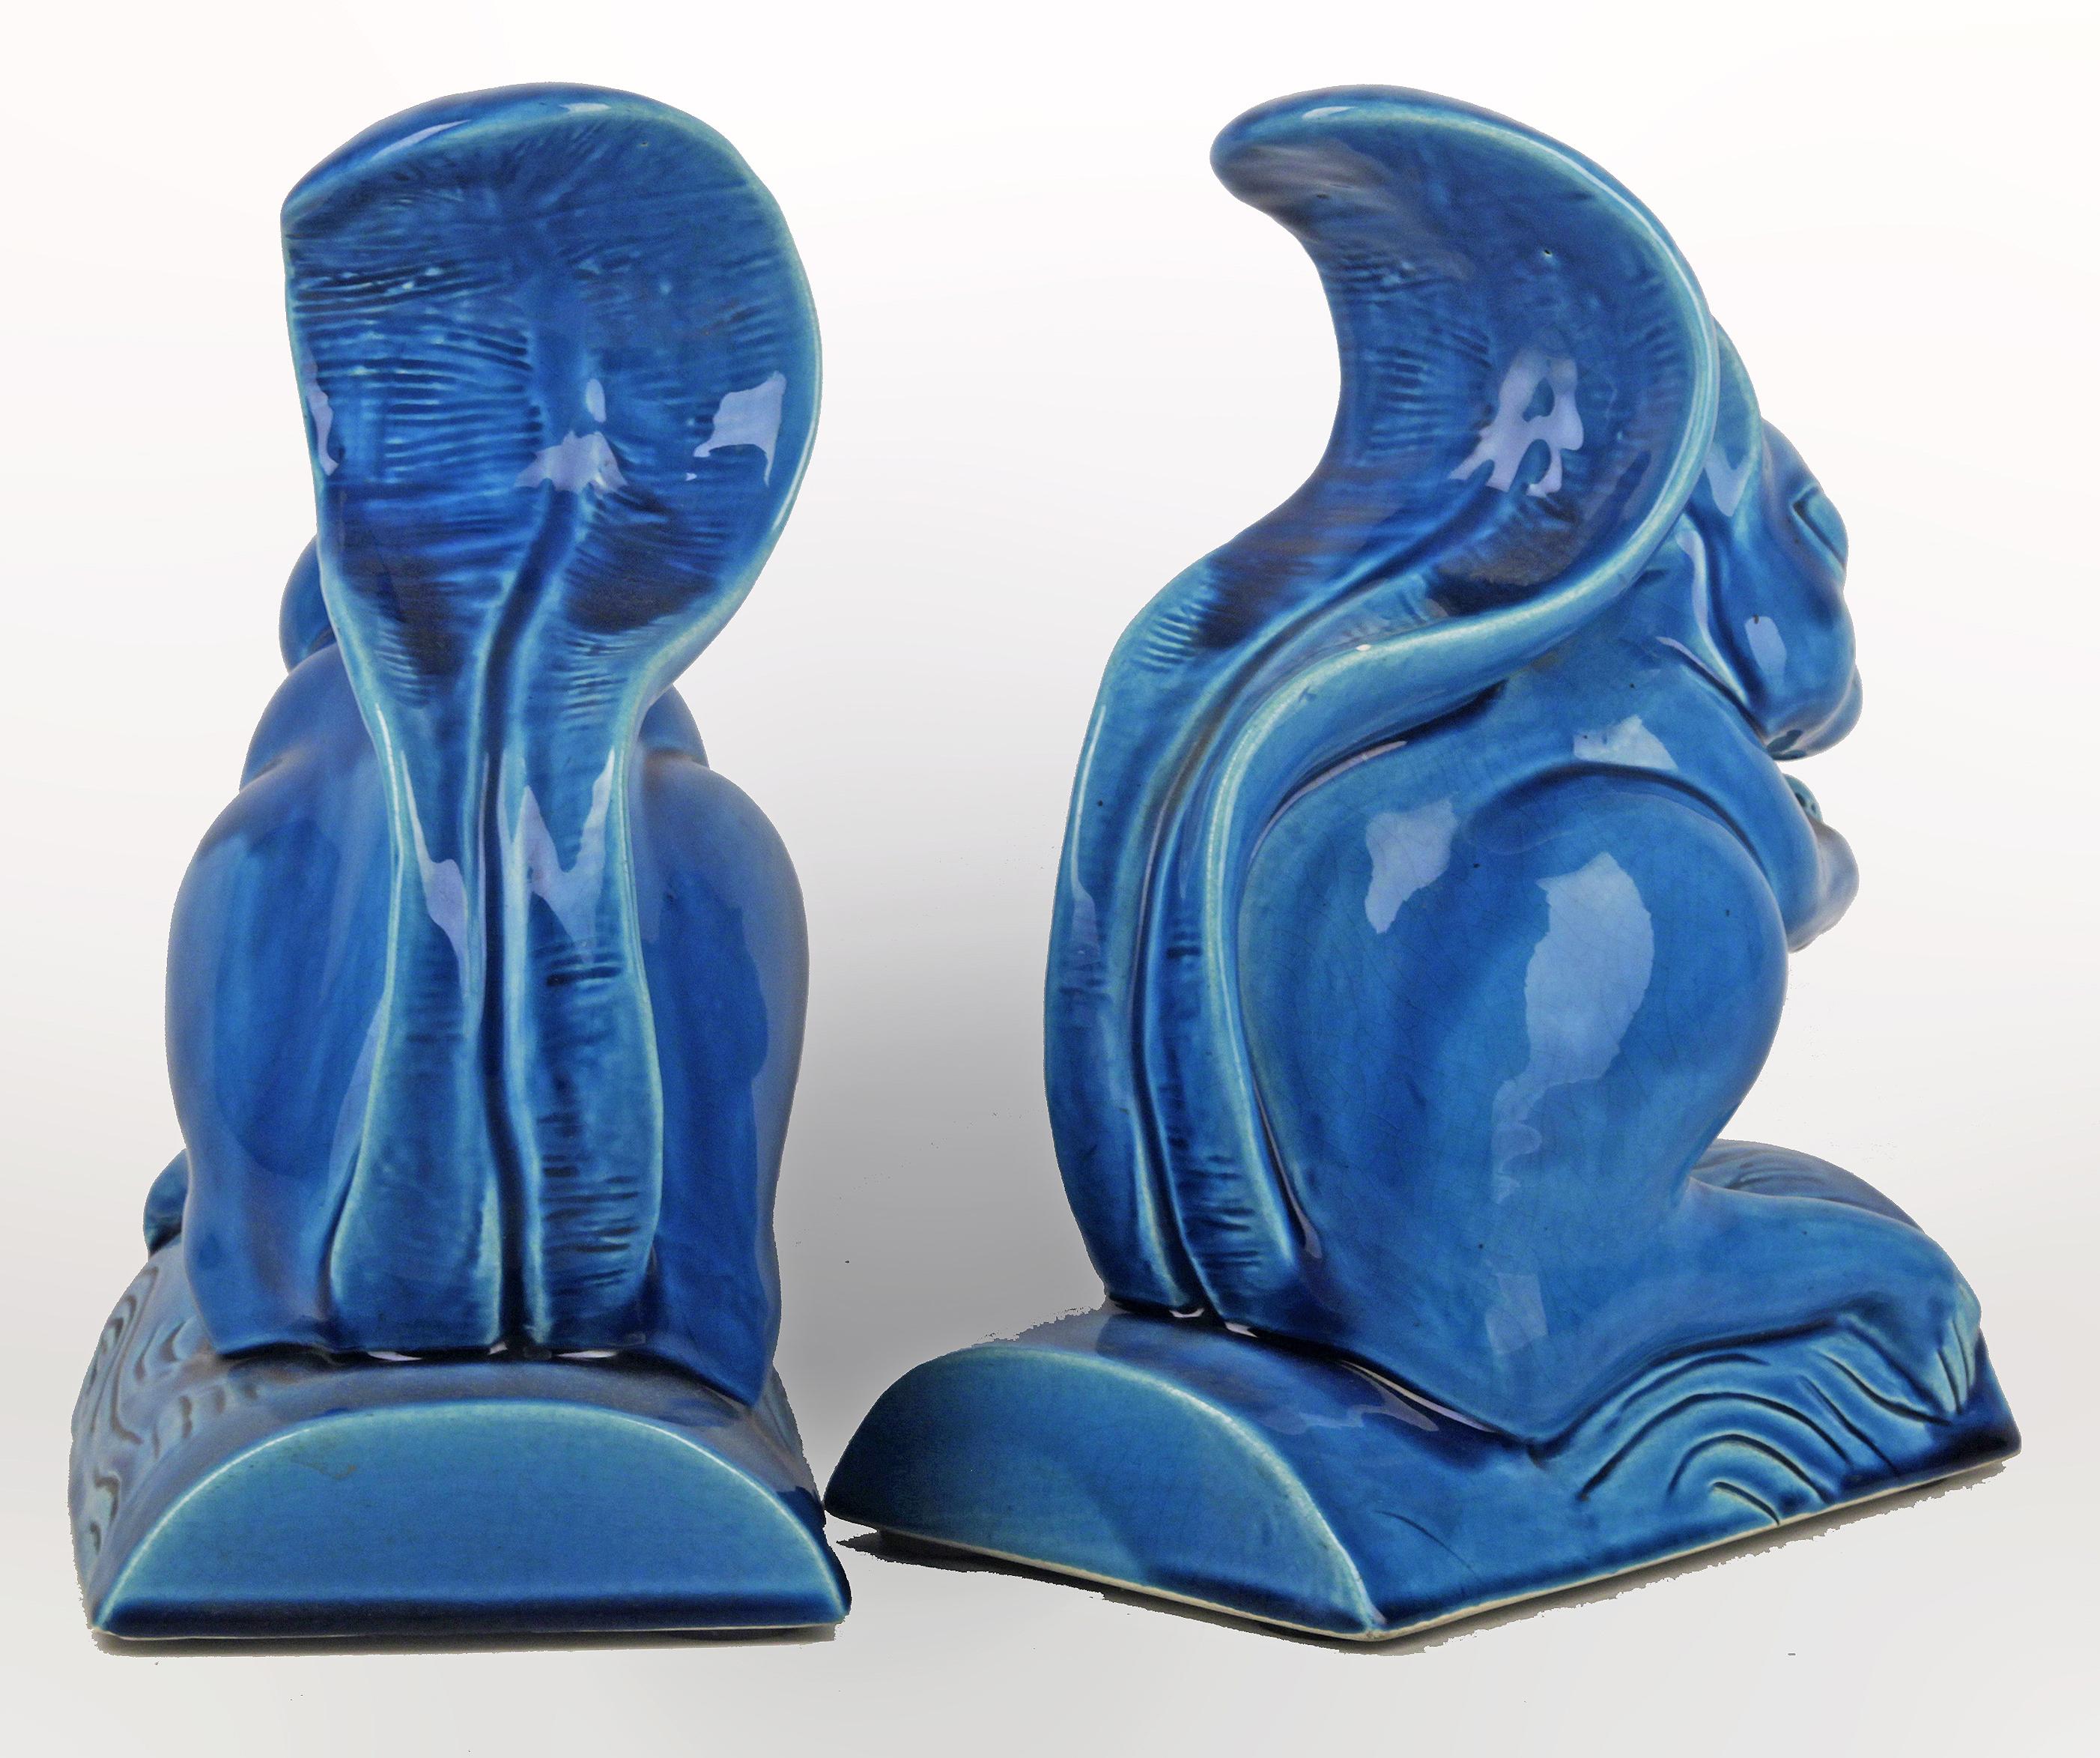 Enameled Set of Mid-20th Century Chinese Glazed Blue Ceramic Squirrel Sculptures/Bookends